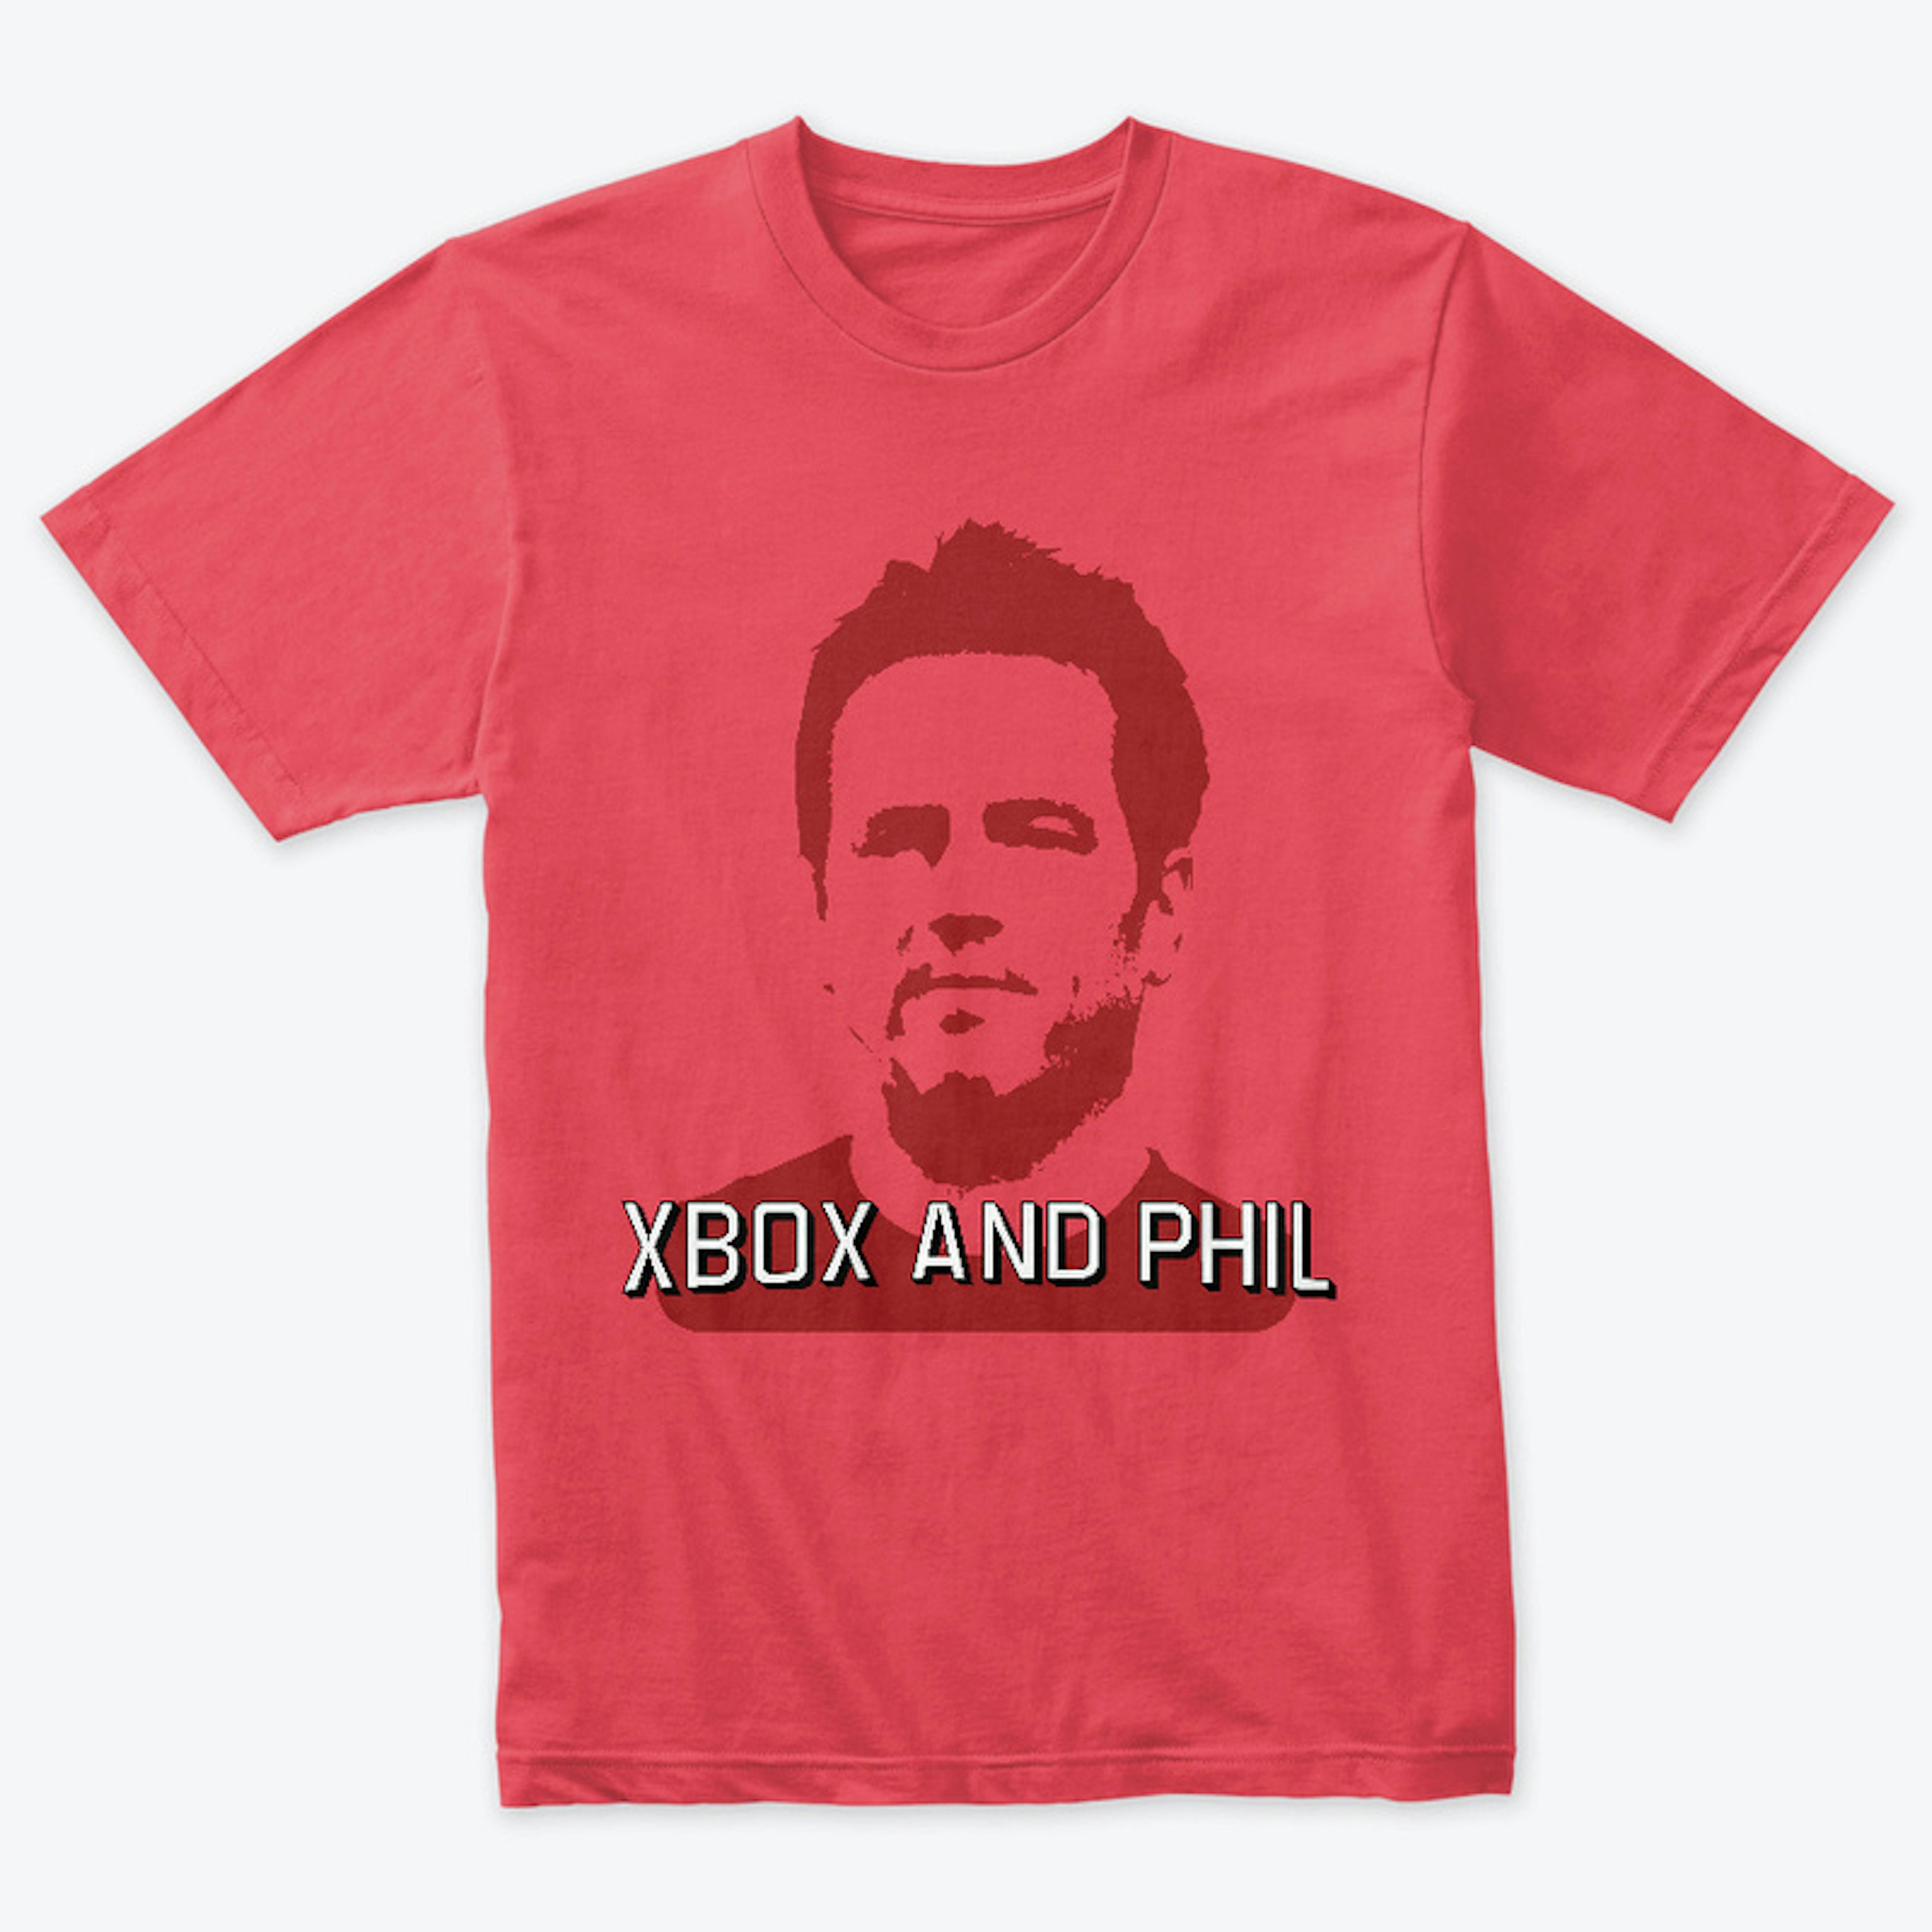 Xbox and Phil